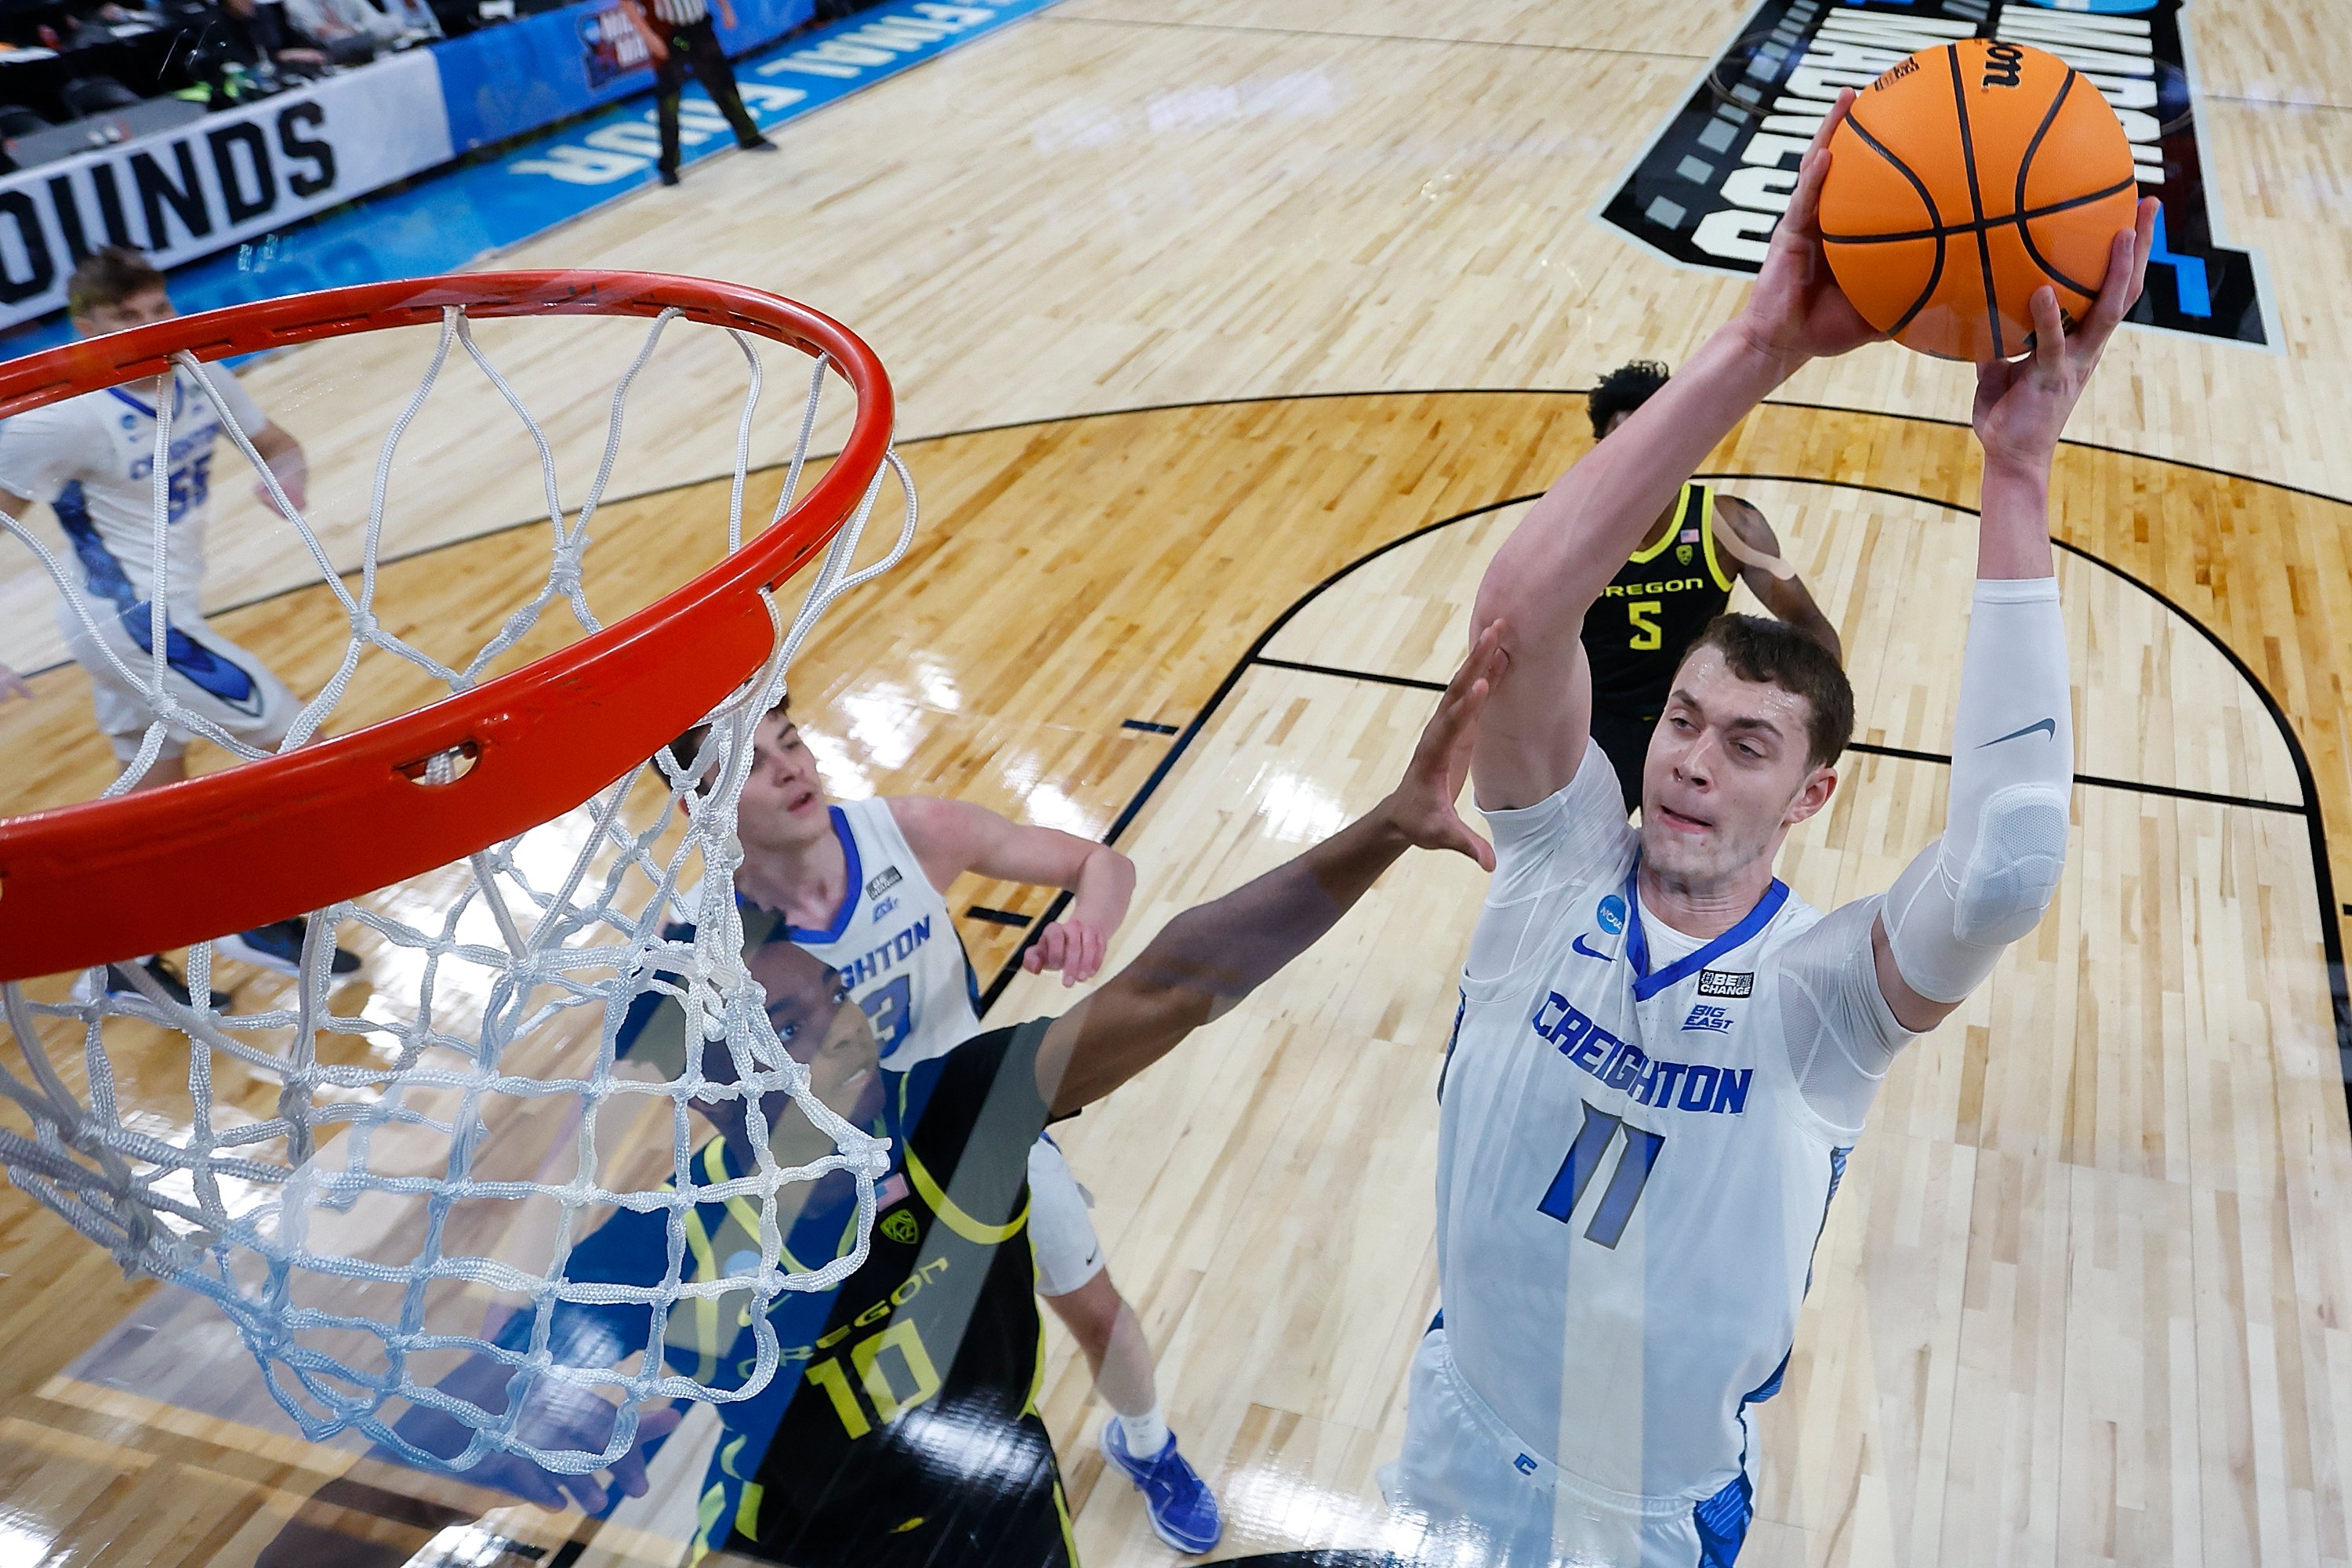 Ryan Kalkbrenner #11 of the Creighton Bluejays goes to the basket in the first half of the game against the Oregon Ducks during the second round of the 2024 NCAA Men's Basketball Tournament held at PPG PAINTS Arena on March 23, 2024, in Pittsburgh, Pennsylvania.